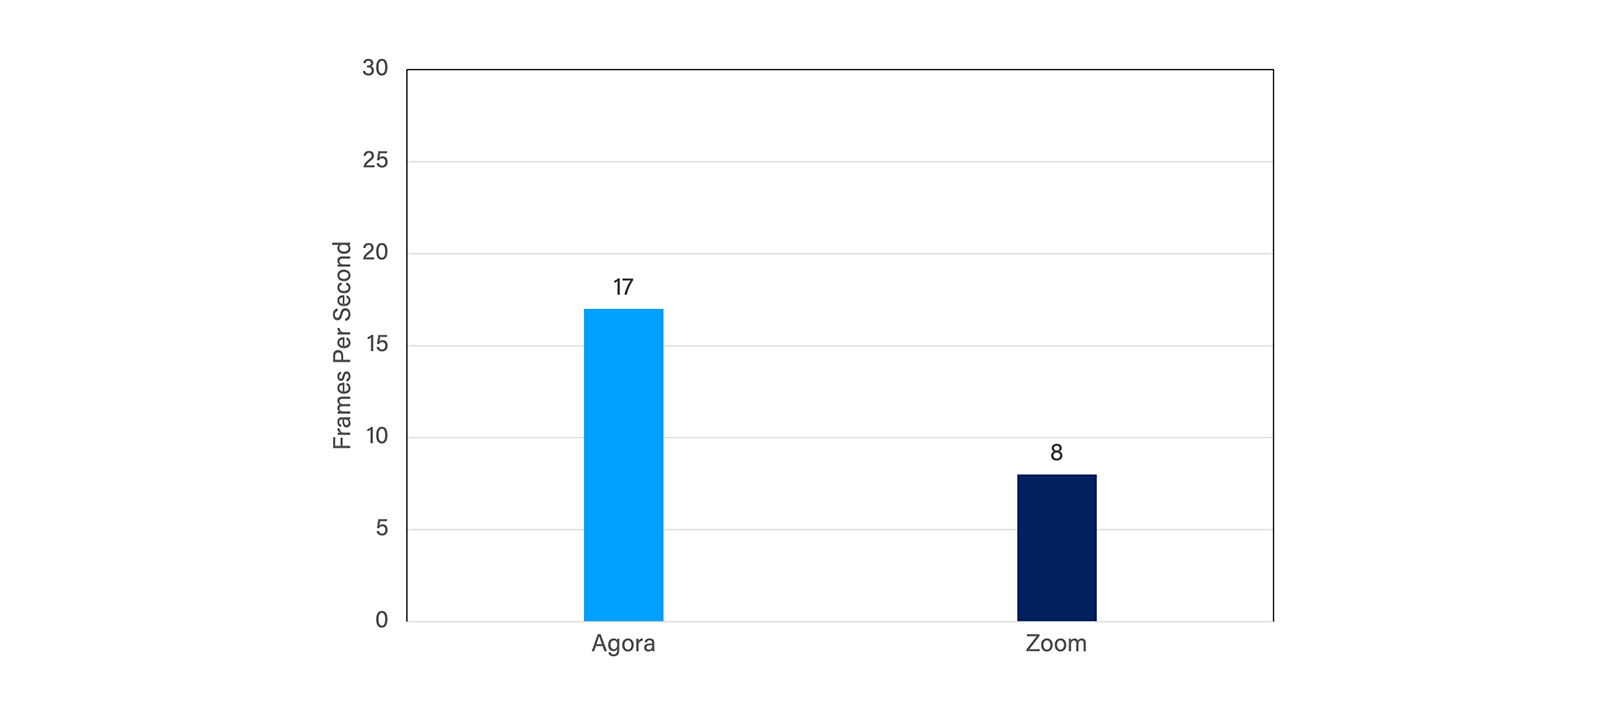 Figure 4: FPS comparison for Agora and Zoom with network having uplink 600ms jitter.